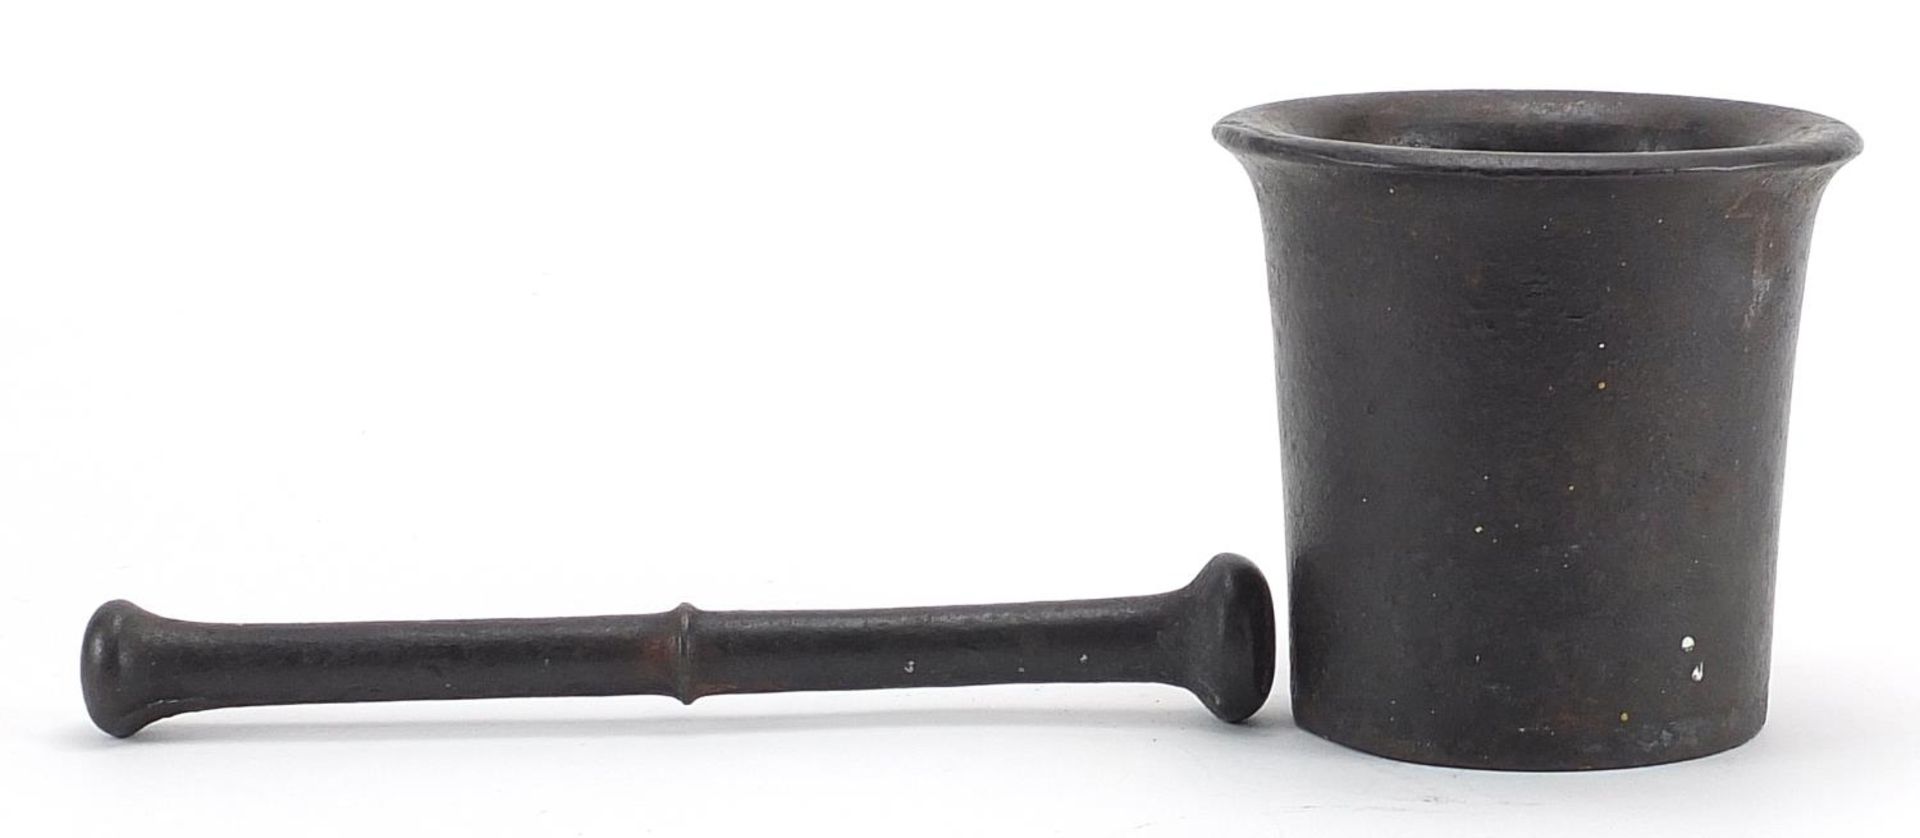 Antique bronzed pestle and mortar, the mortar 12cm high - Image 3 of 4